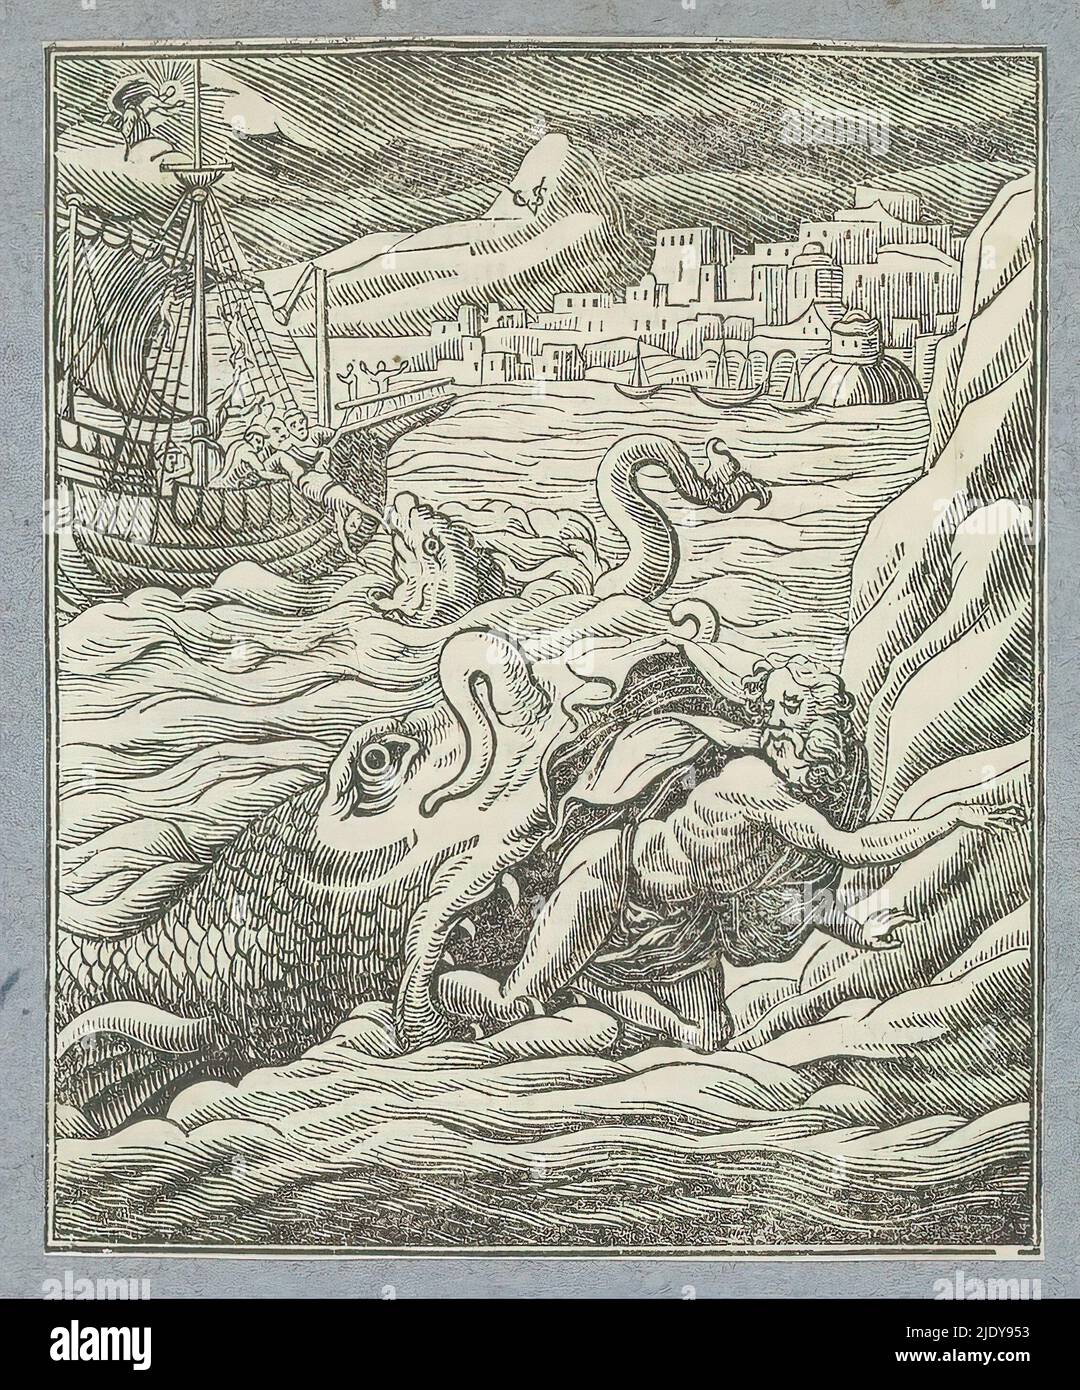 Jonah and the Whale, During the heavy storm, Jonah is thrown overboard by the fishermen. He is swallowed by a whale. After surviving three days and nights in the belly of the fish, the fish spits Jonah out onto land. The print is part of an album., print maker: Christoffel van Sichem (II), (mentioned on object), print maker: Christoffel van Sichem (III), (mentioned on object), publisher: Pieter Jacobsz. Paets, Amsterdam, 1645 - 1646, paper, letterpress printing, height 108 mm × width 88 mm Stock Photo